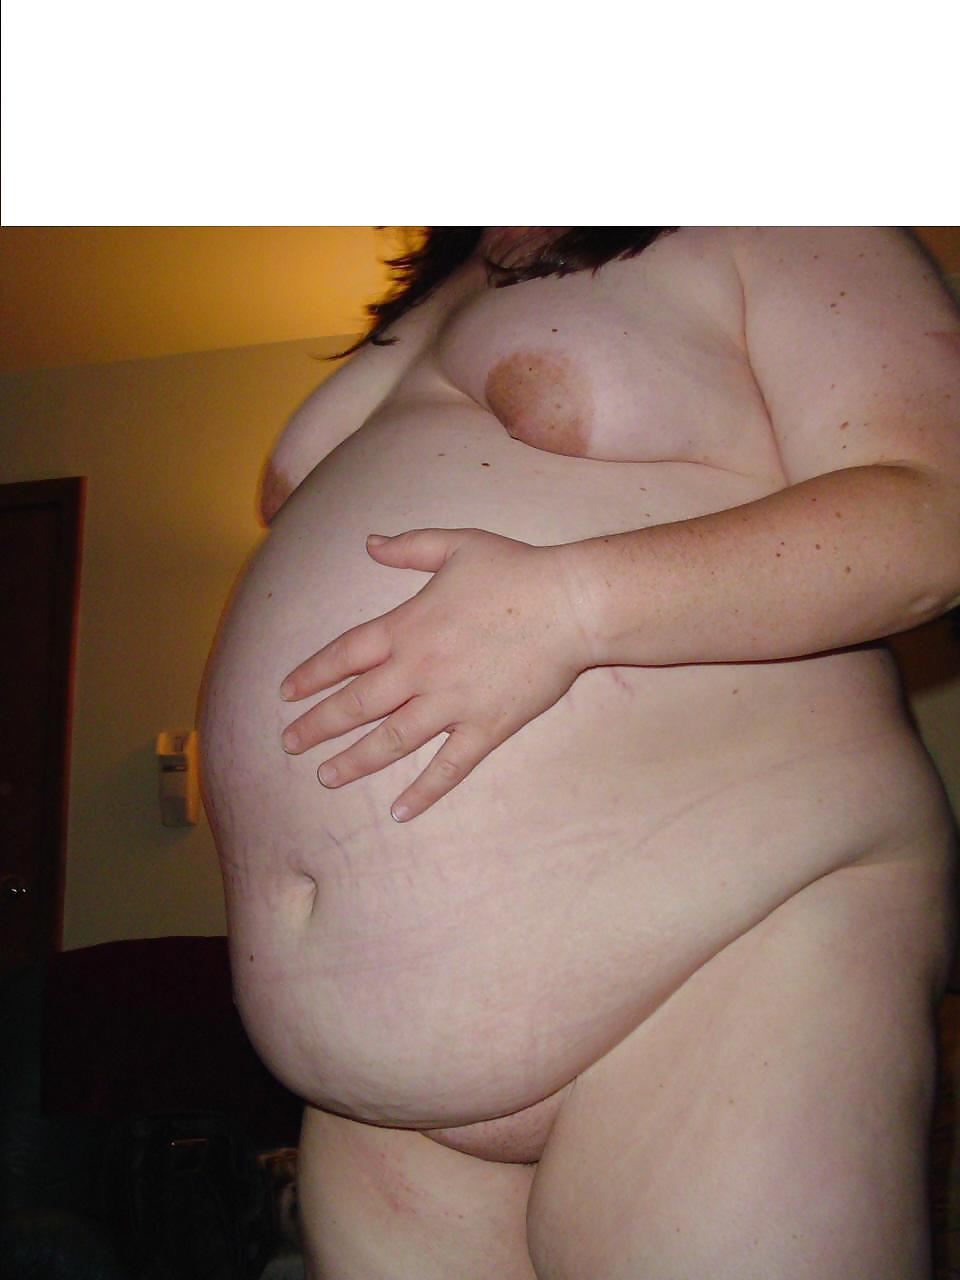 my BBW - Part 7 , some 9 MONTHS PREGNANT and others adult photos